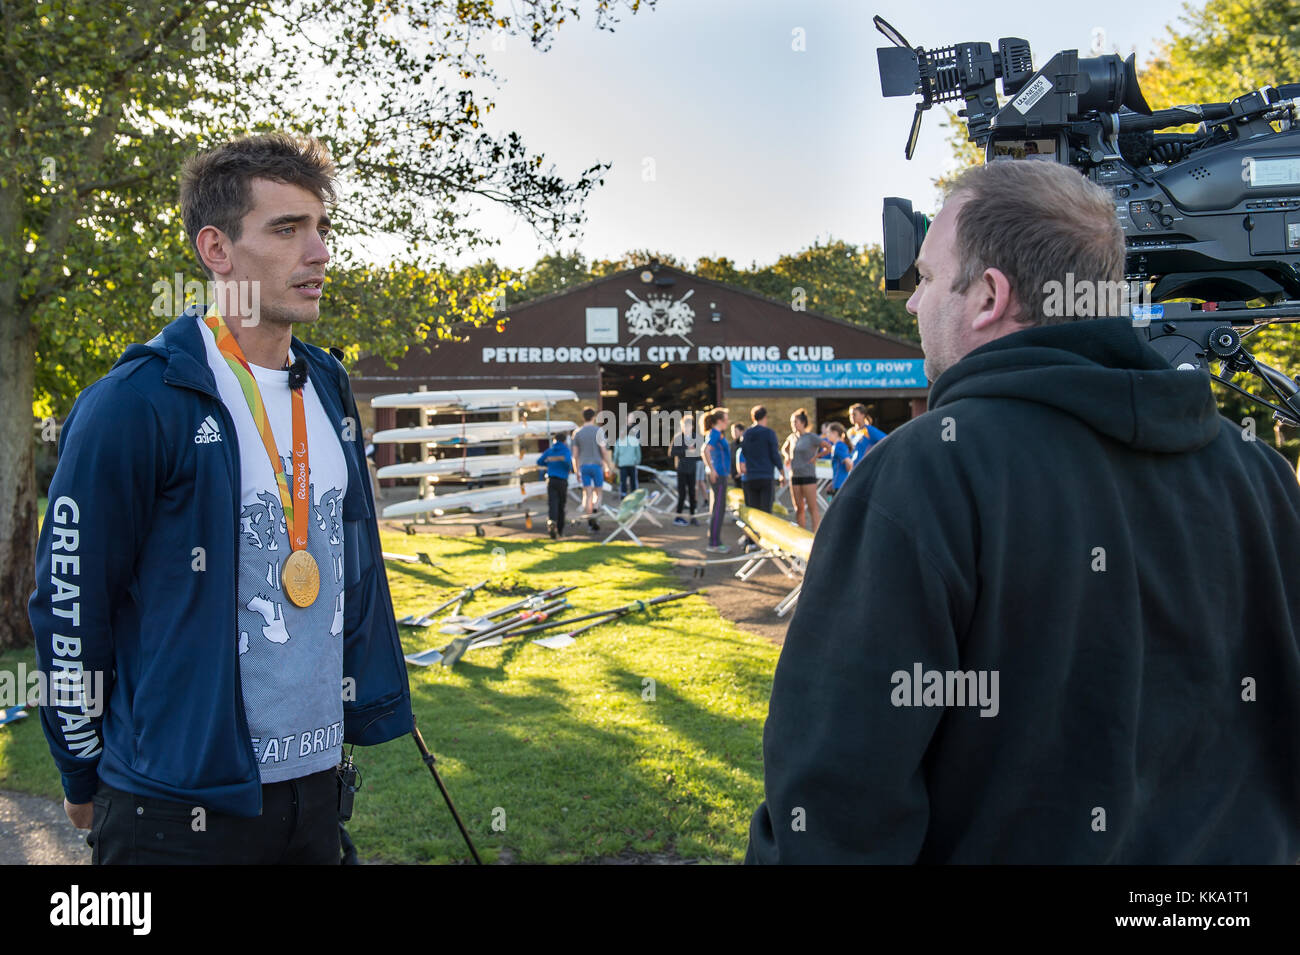 James Fox, Gold medallist in the mixed coxed four at the Rio Paralympics  interviewed by ITV outside his home club of Peterborough City Rowing Club. Stock Photo